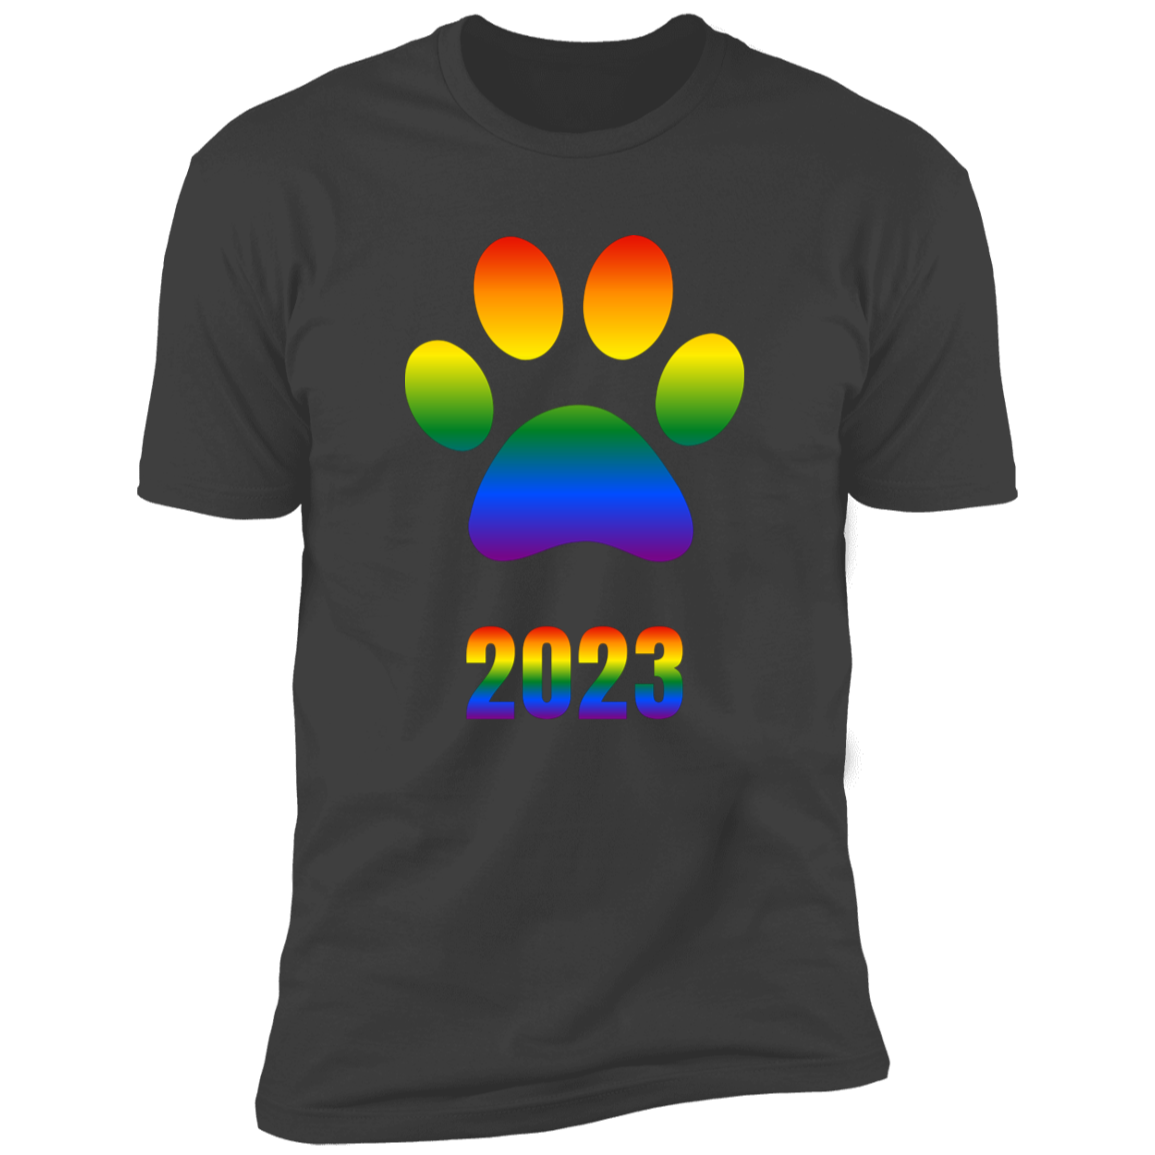 Dog Paw pride 2023 t-shirt, dog pride dog shirt for humans, in heavy metal gray